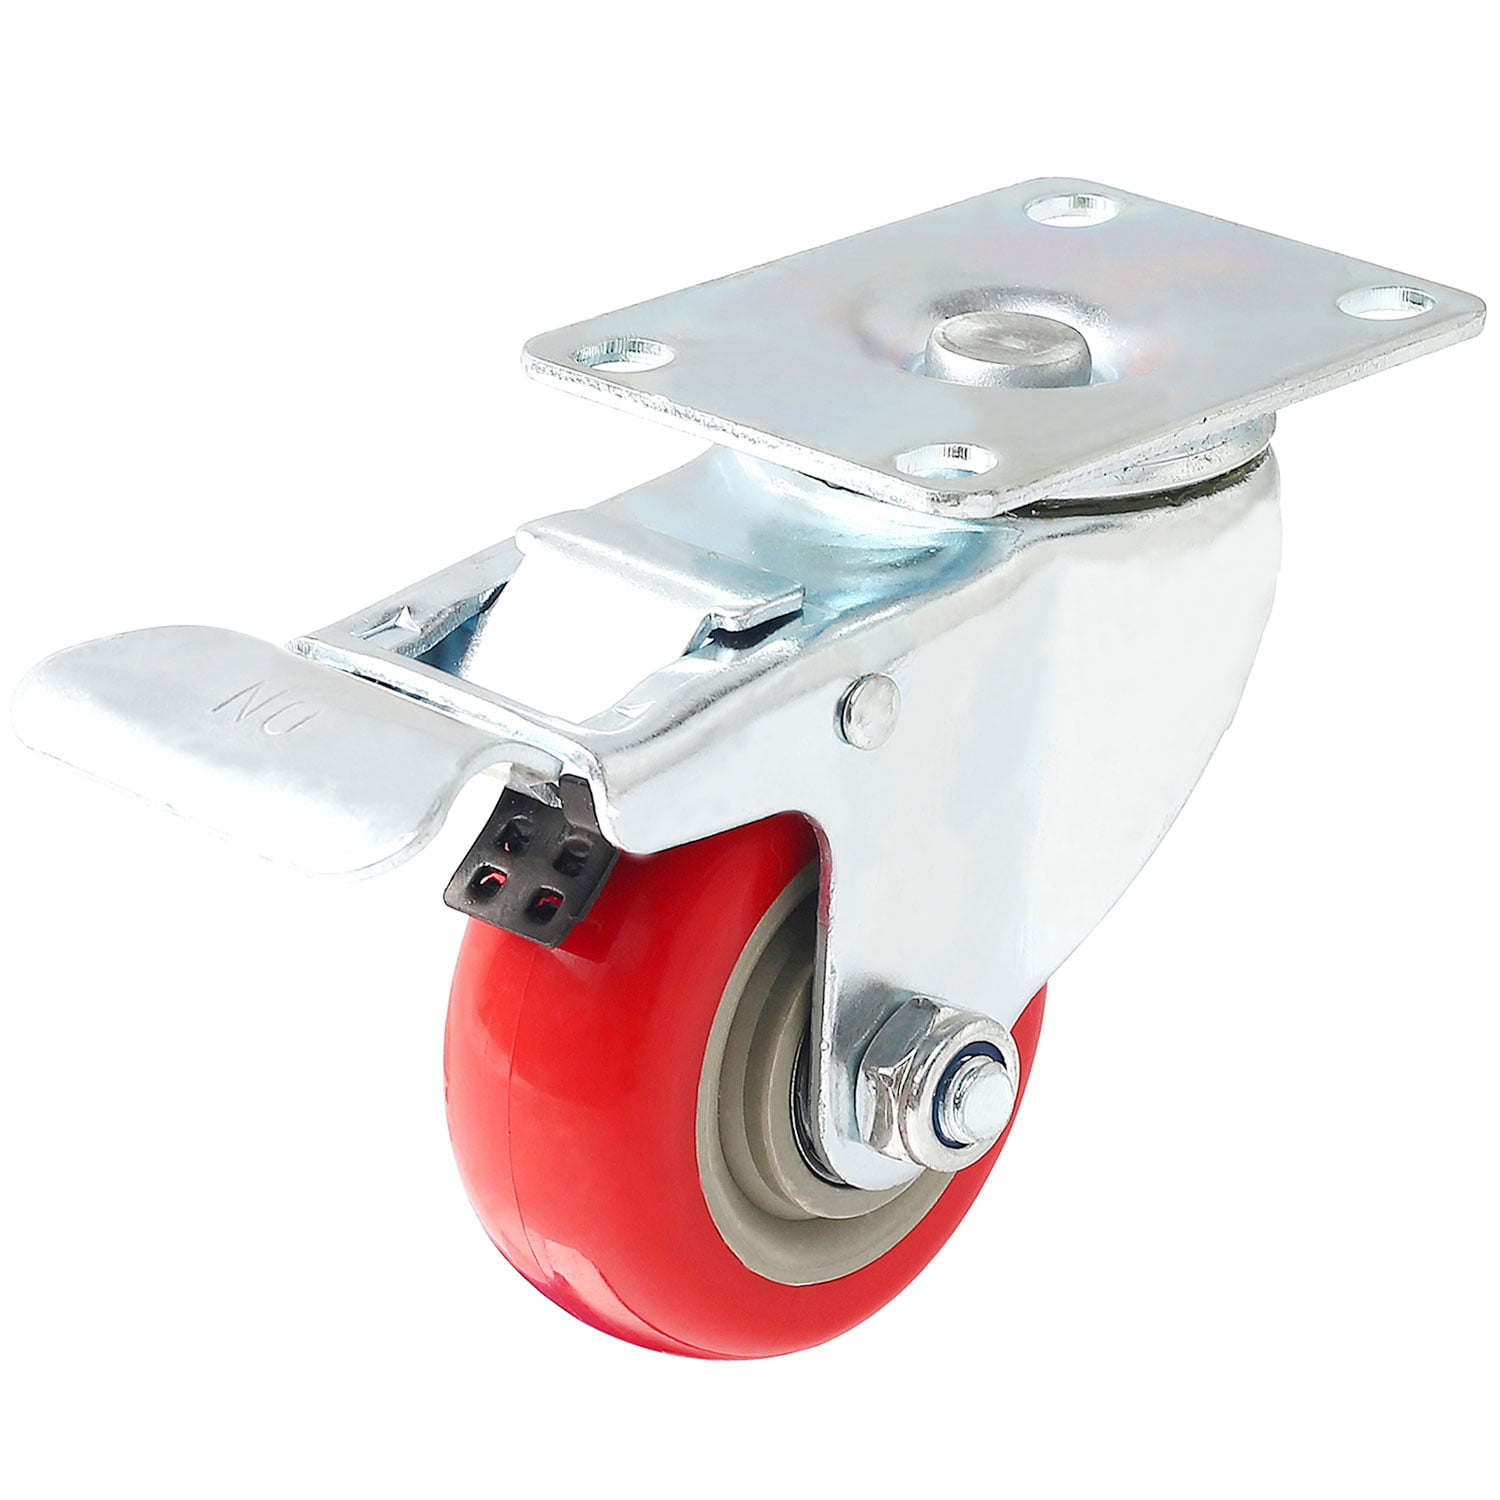 3 inch Swivel Caster Wheels,Heavy Duty Plate Casters with Safety Brake Total ... 